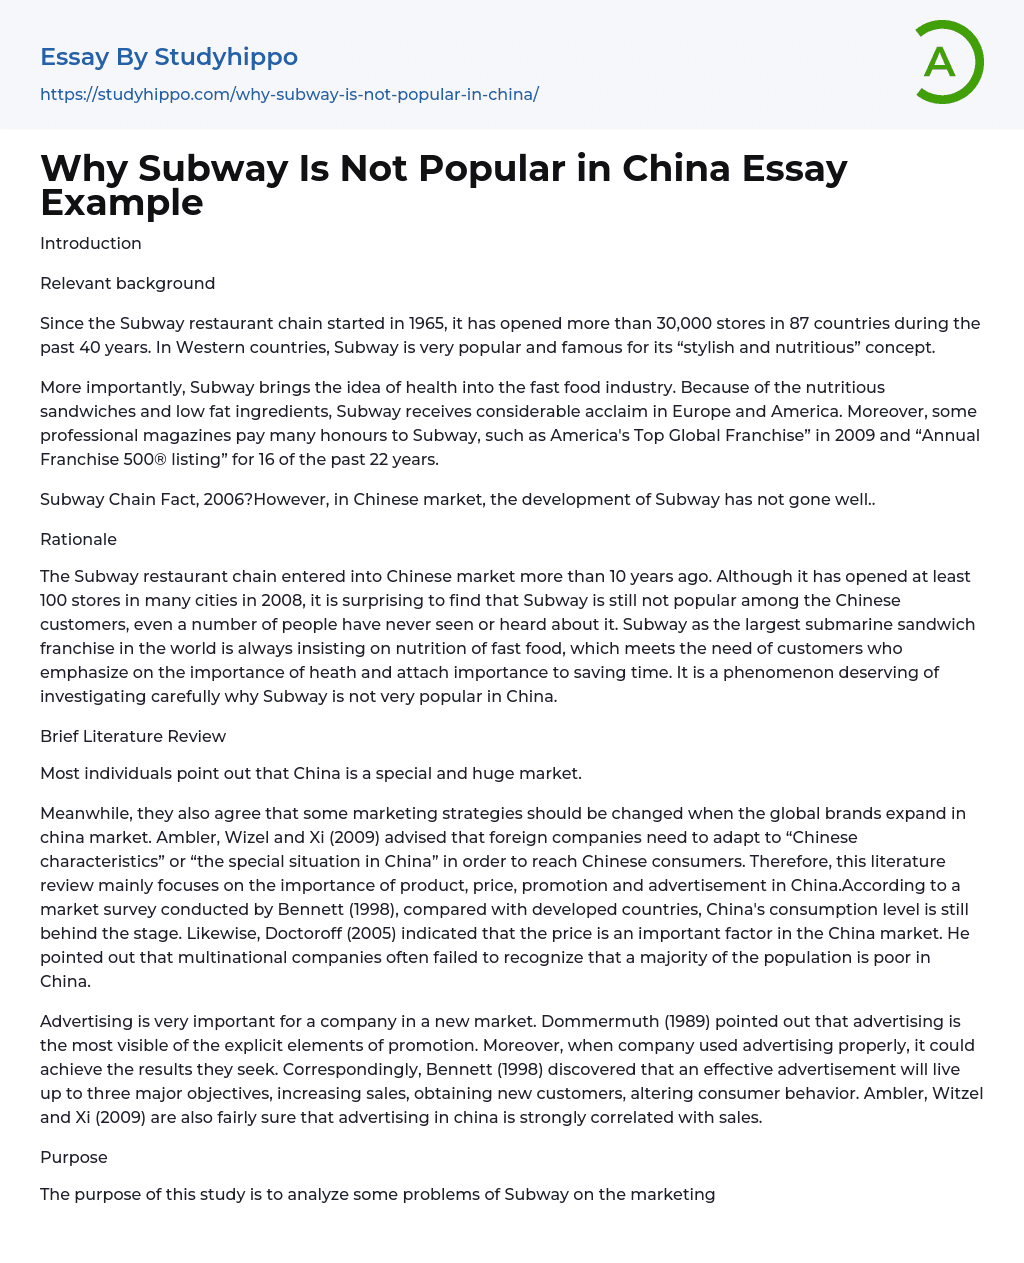 Why Subway Is Not Popular in China Essay Example